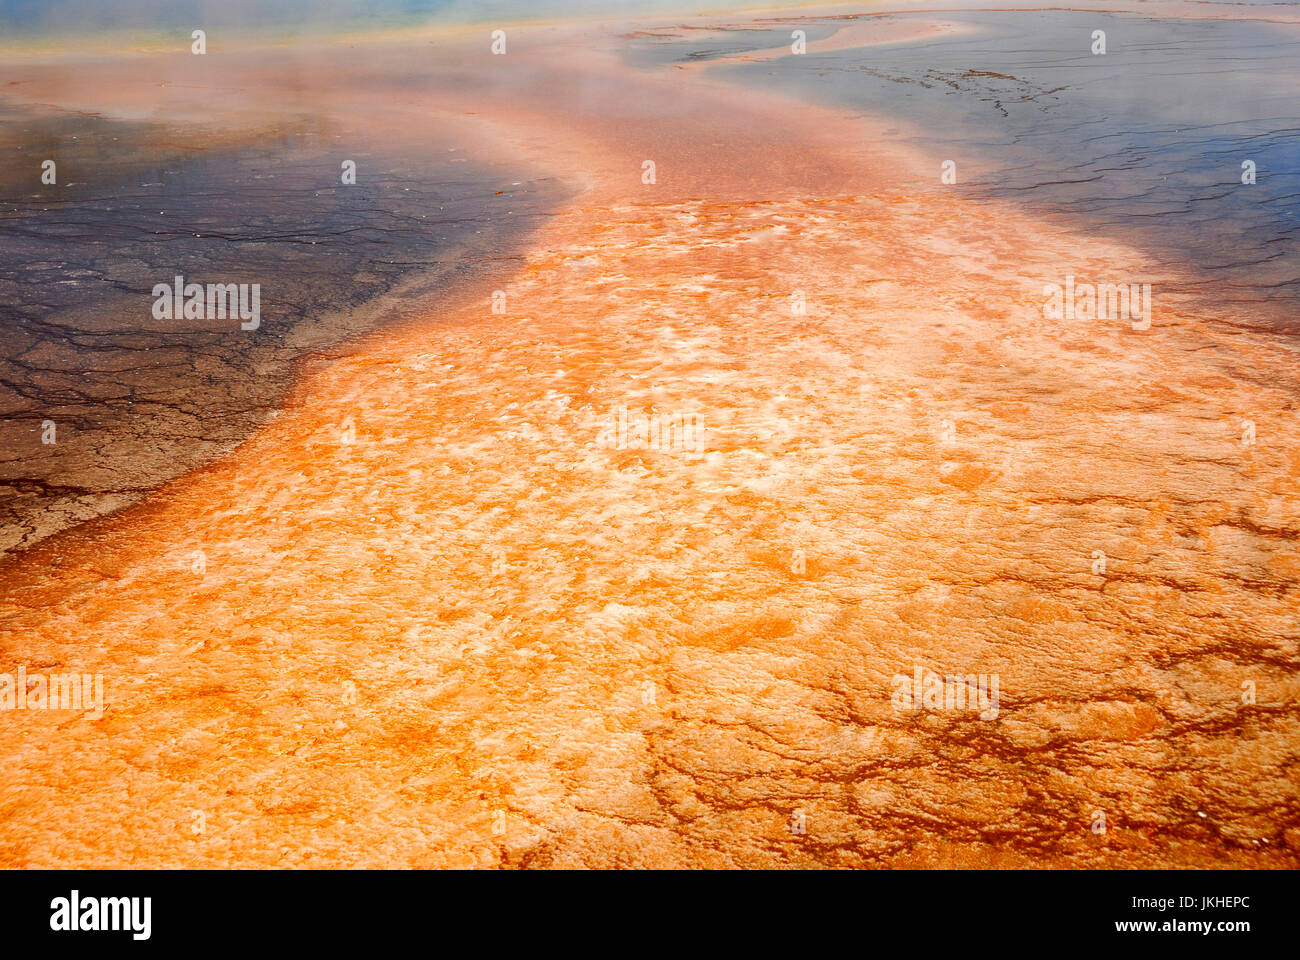 Bacterial mat, Grand Prismatic Spring, Yellowstone National Park, Wyoming, USA Stock Photo